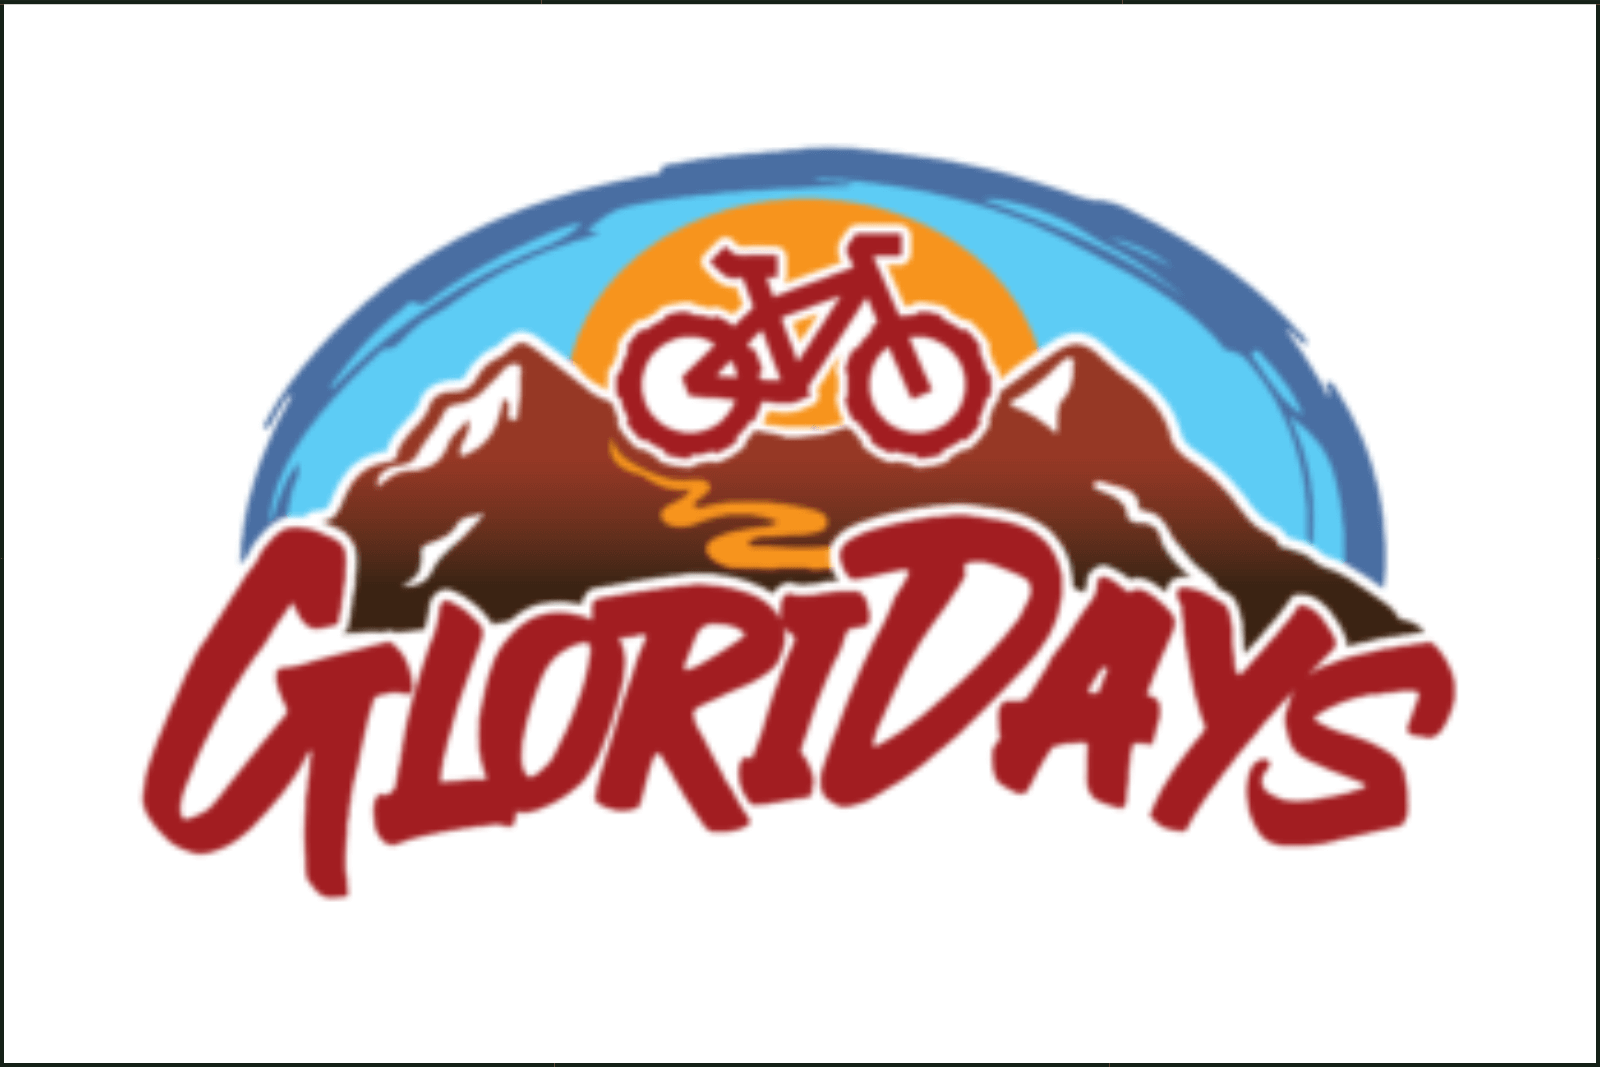 GloriDays Hosted by Zia Rides More Info